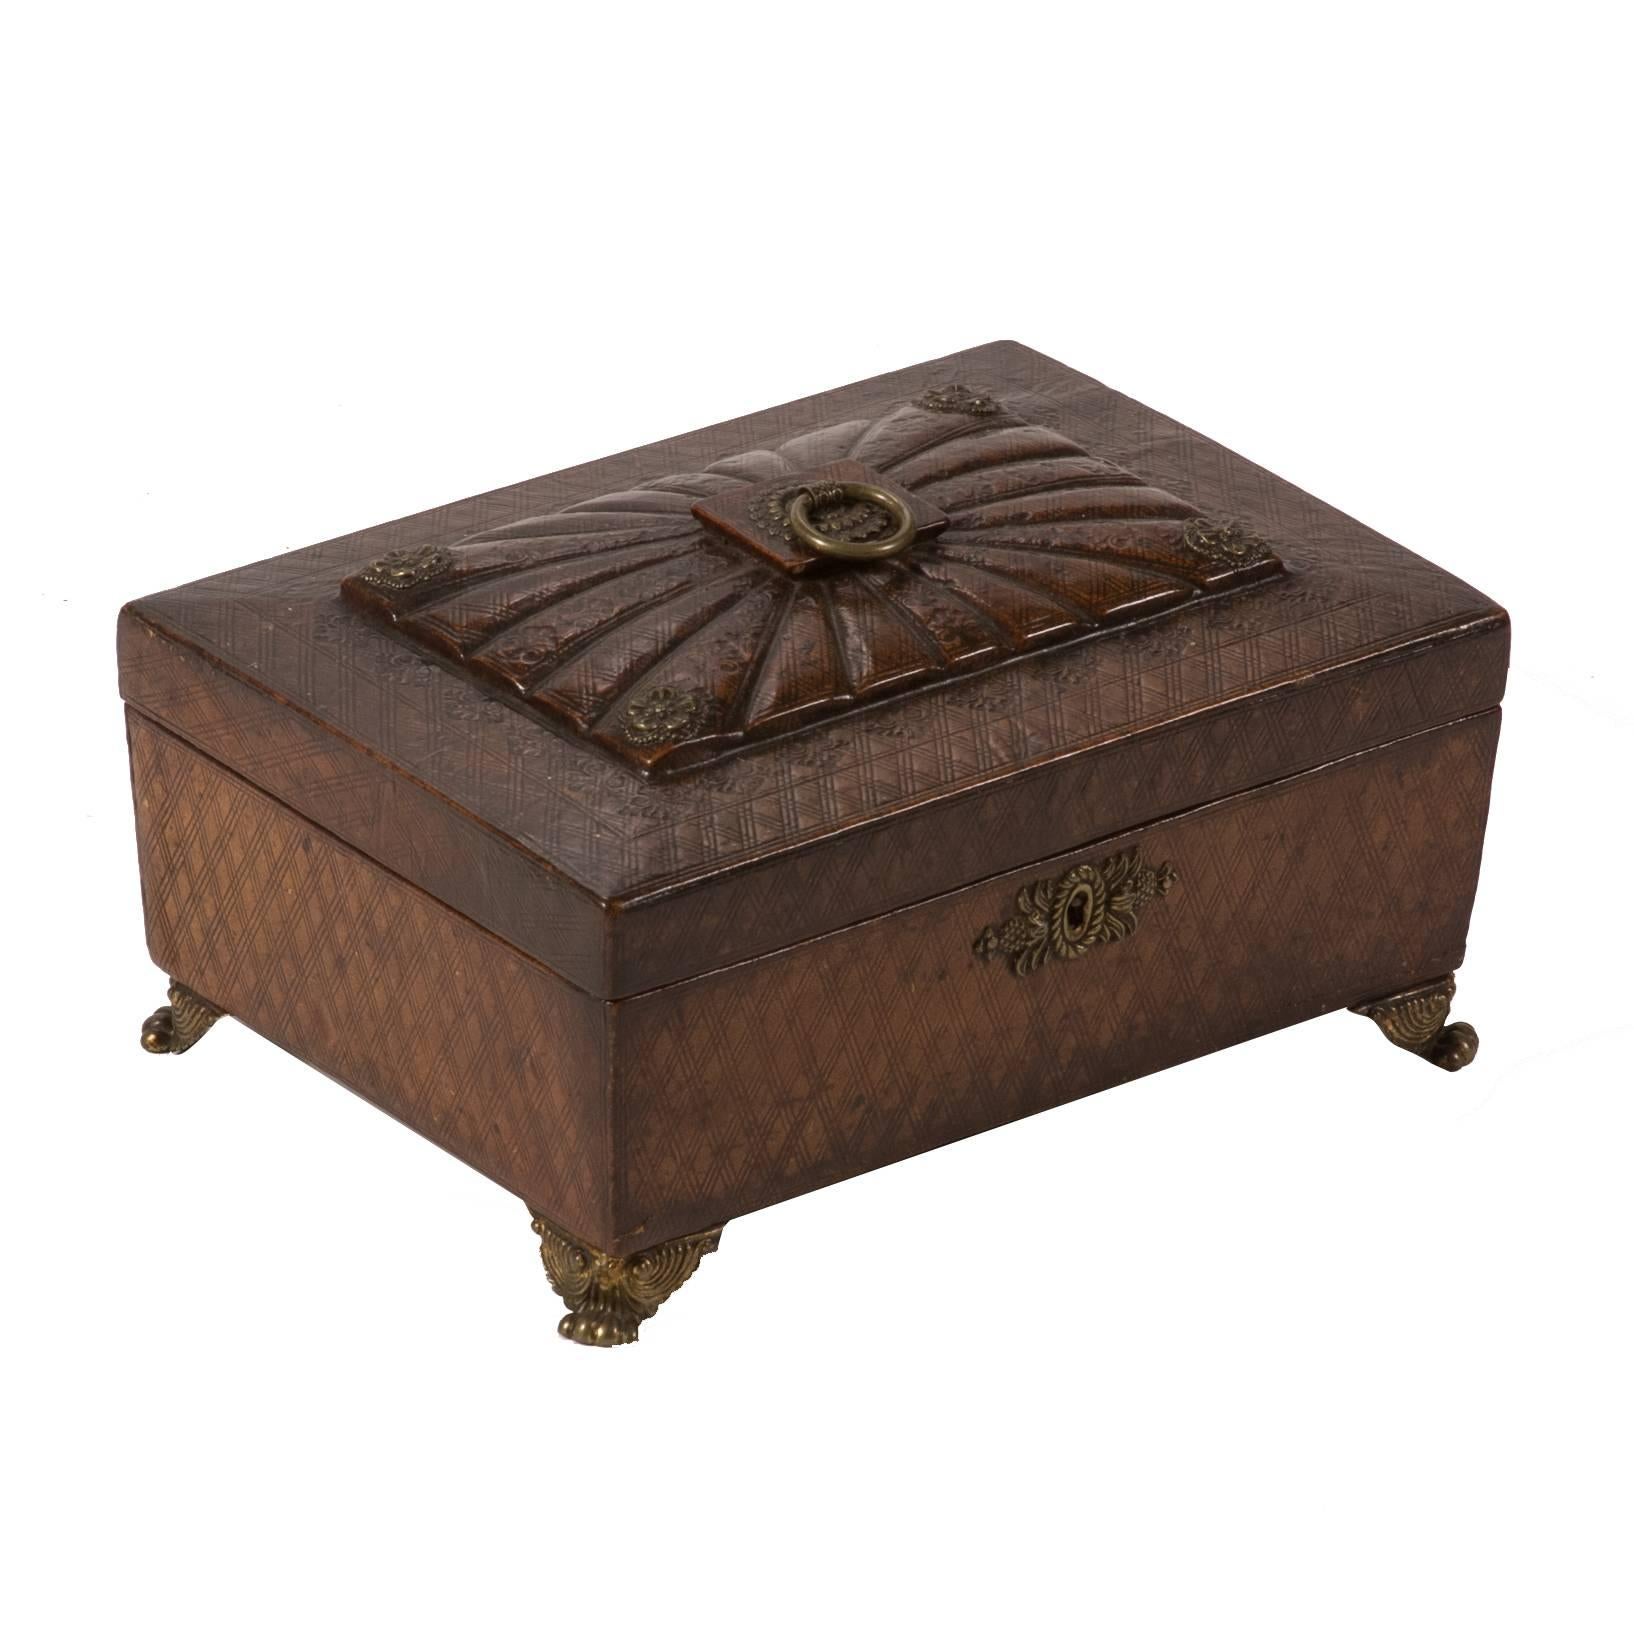 Leather Decorative Box from 1820s England 